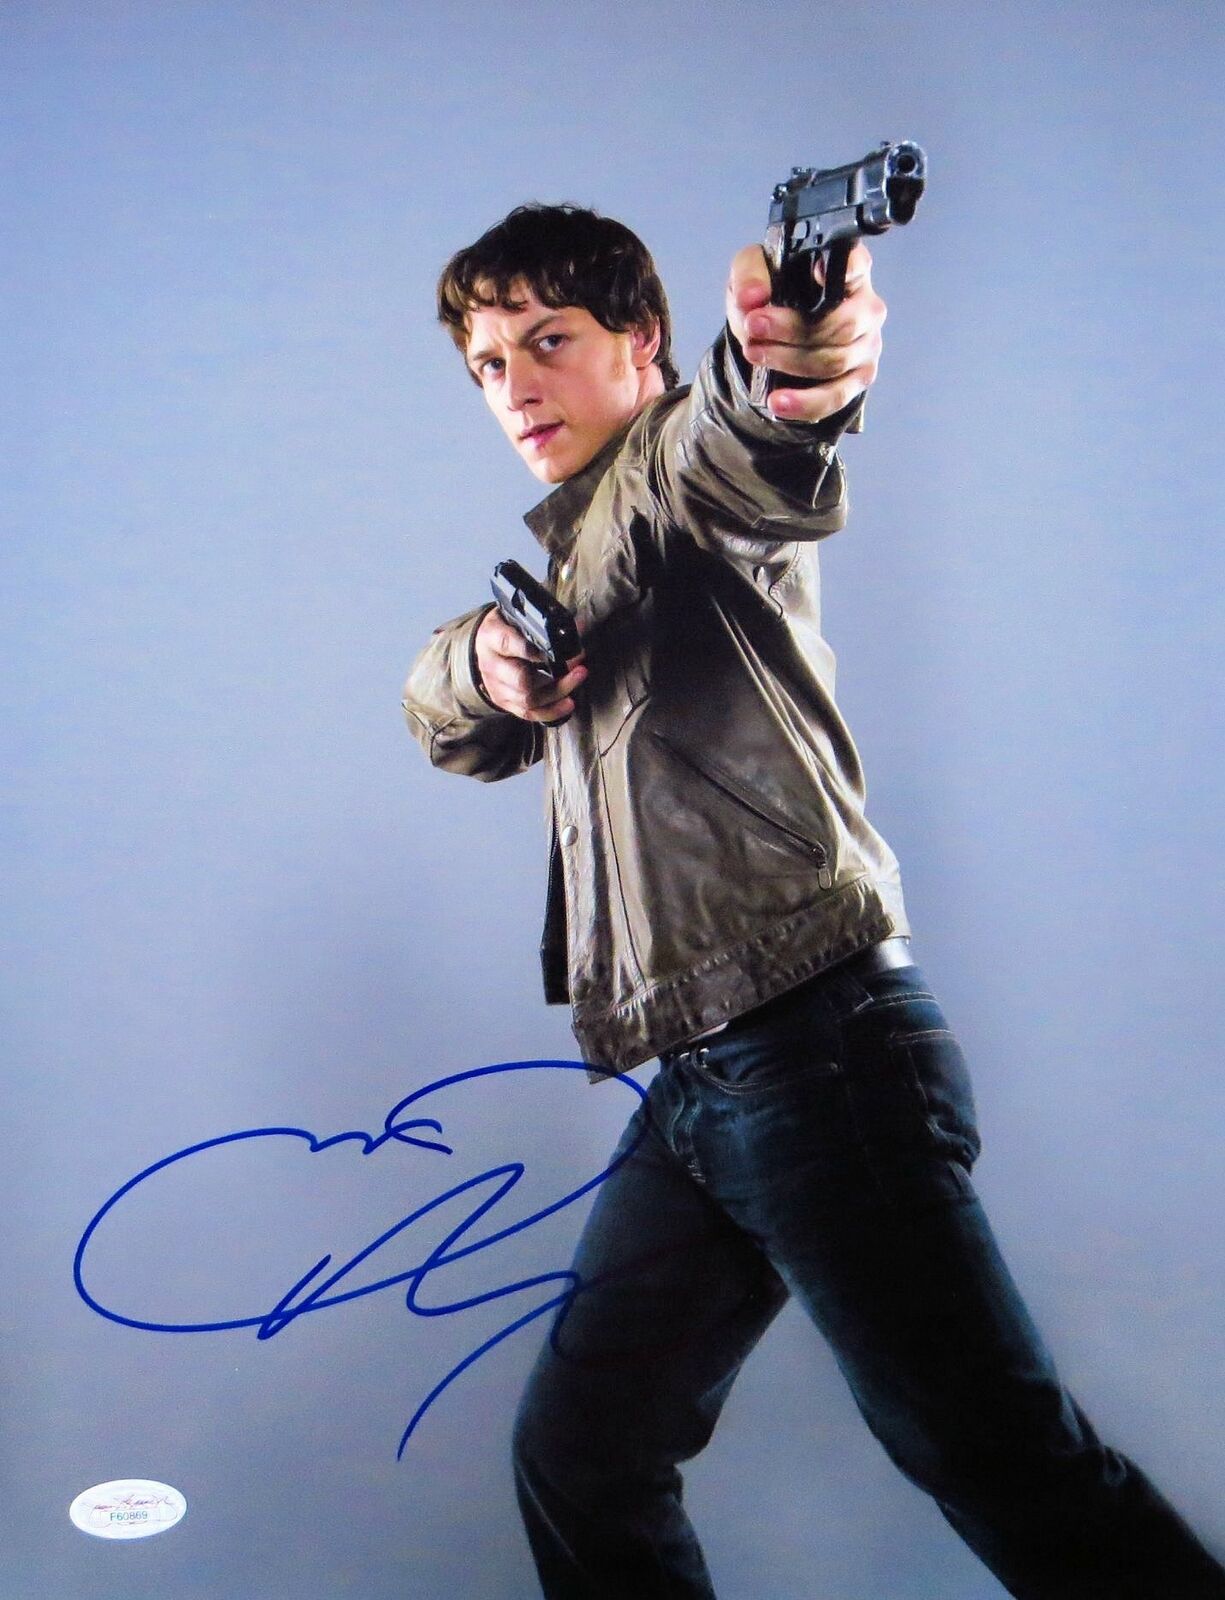 James McAvoy Signed Autographed 11X14 Photo Poster painting Wanted Pose w/Guns JSA F60869